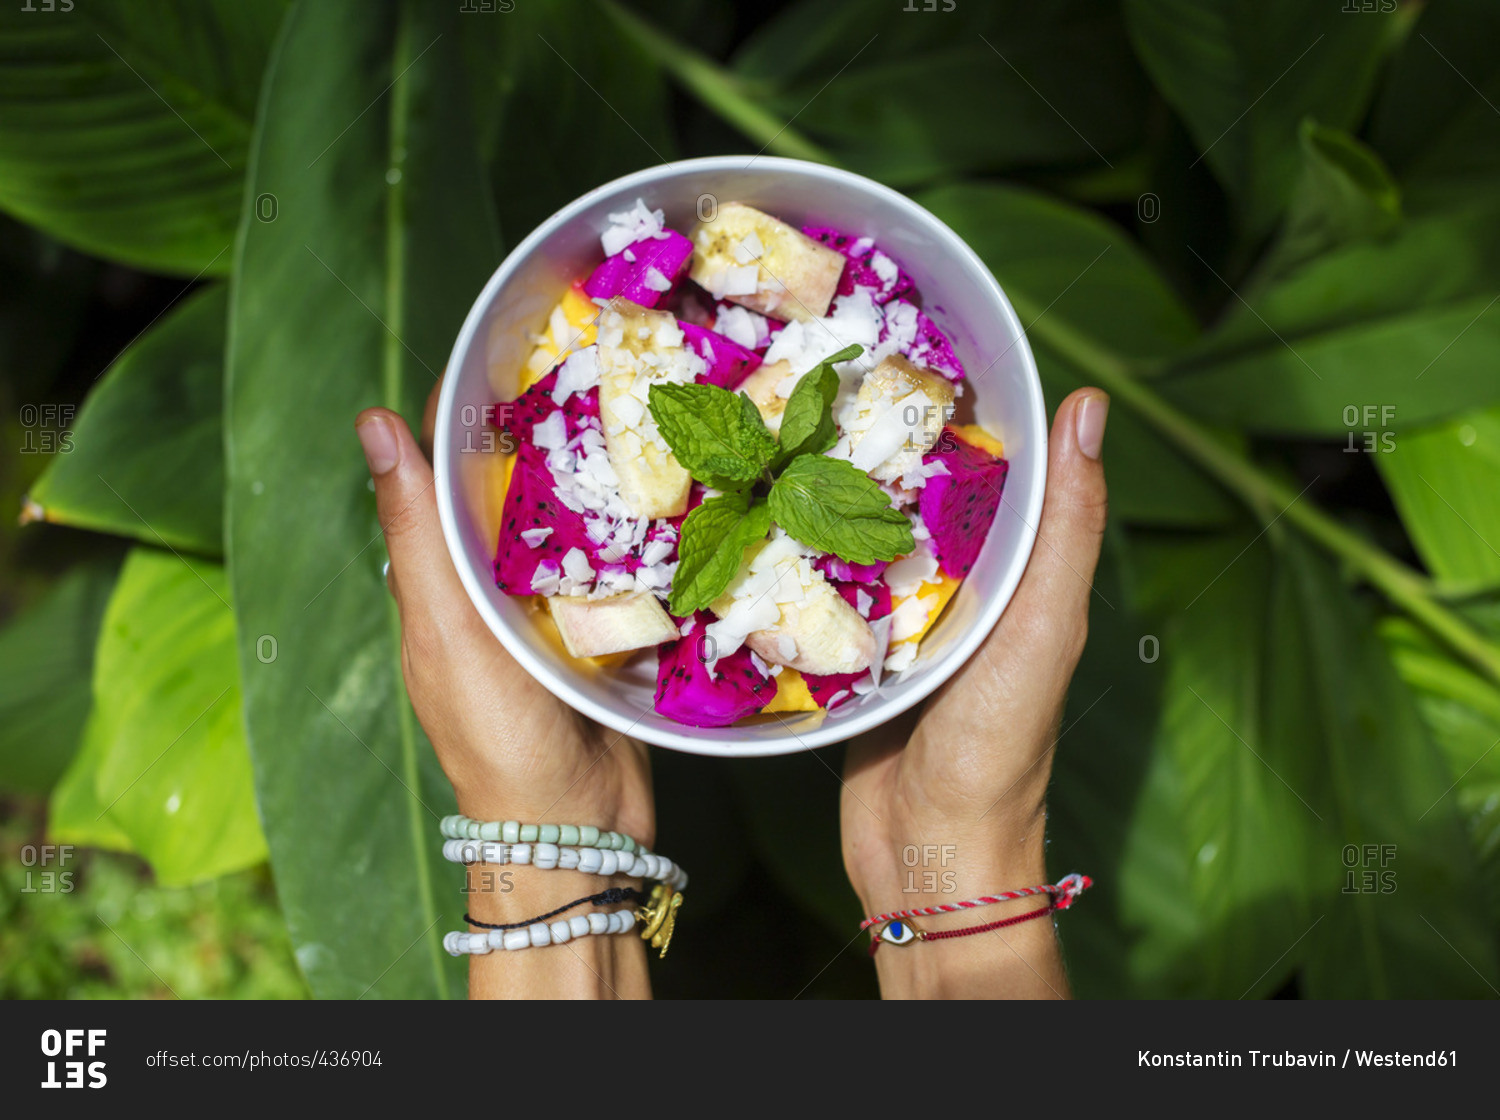 Woman's hands holding bowl of tropical fruit salad